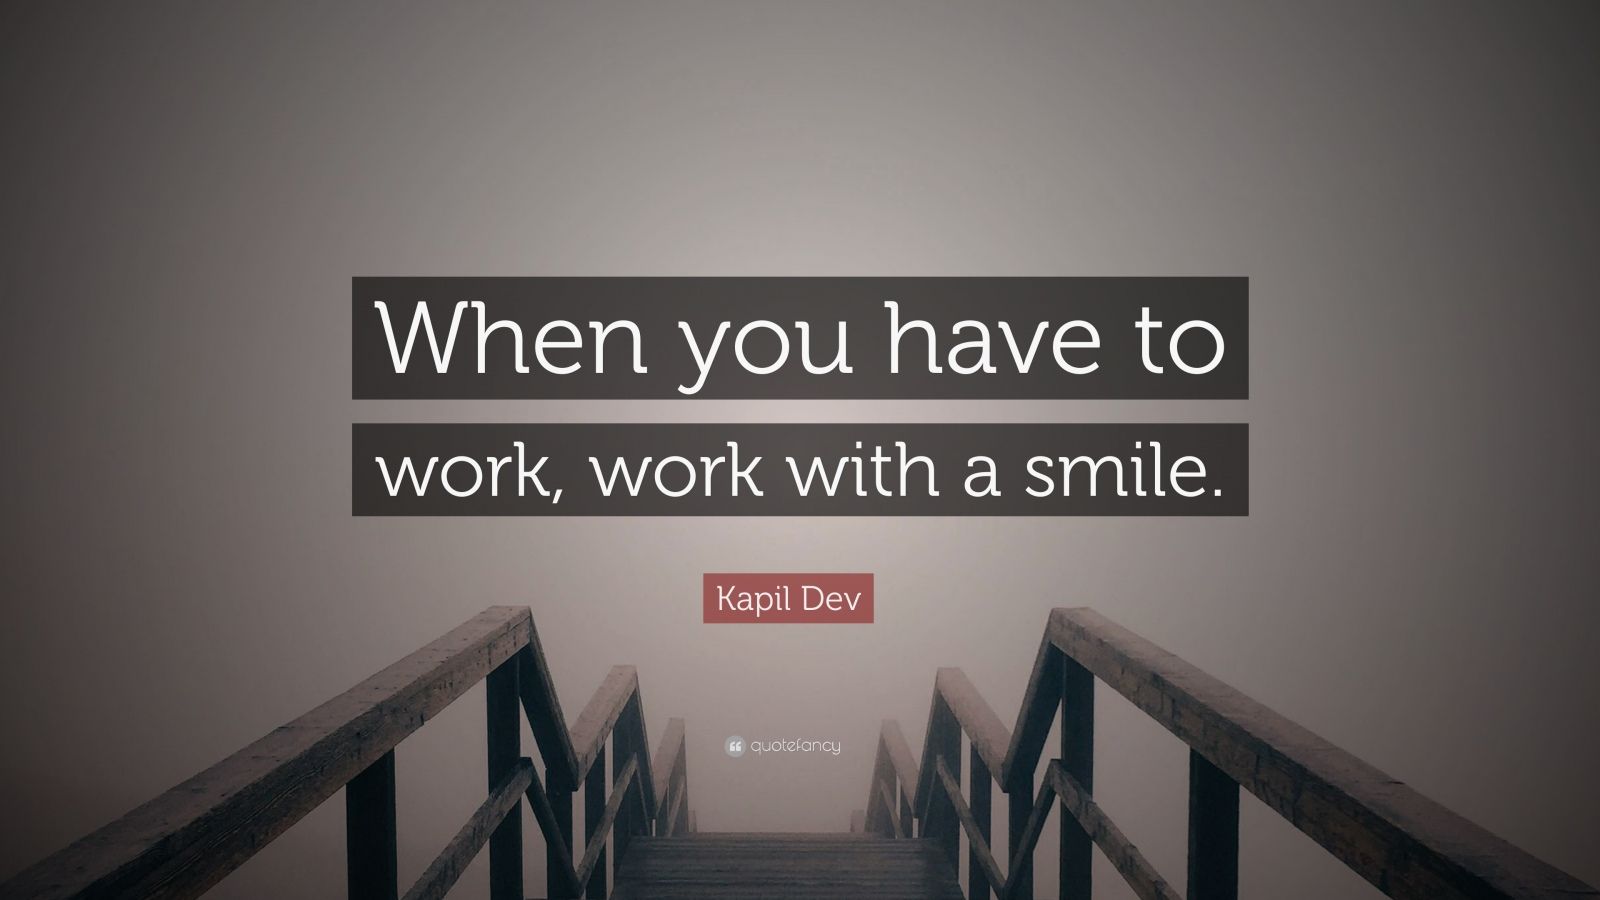 Kapil Dev Quote “When you have to work, work with a smile